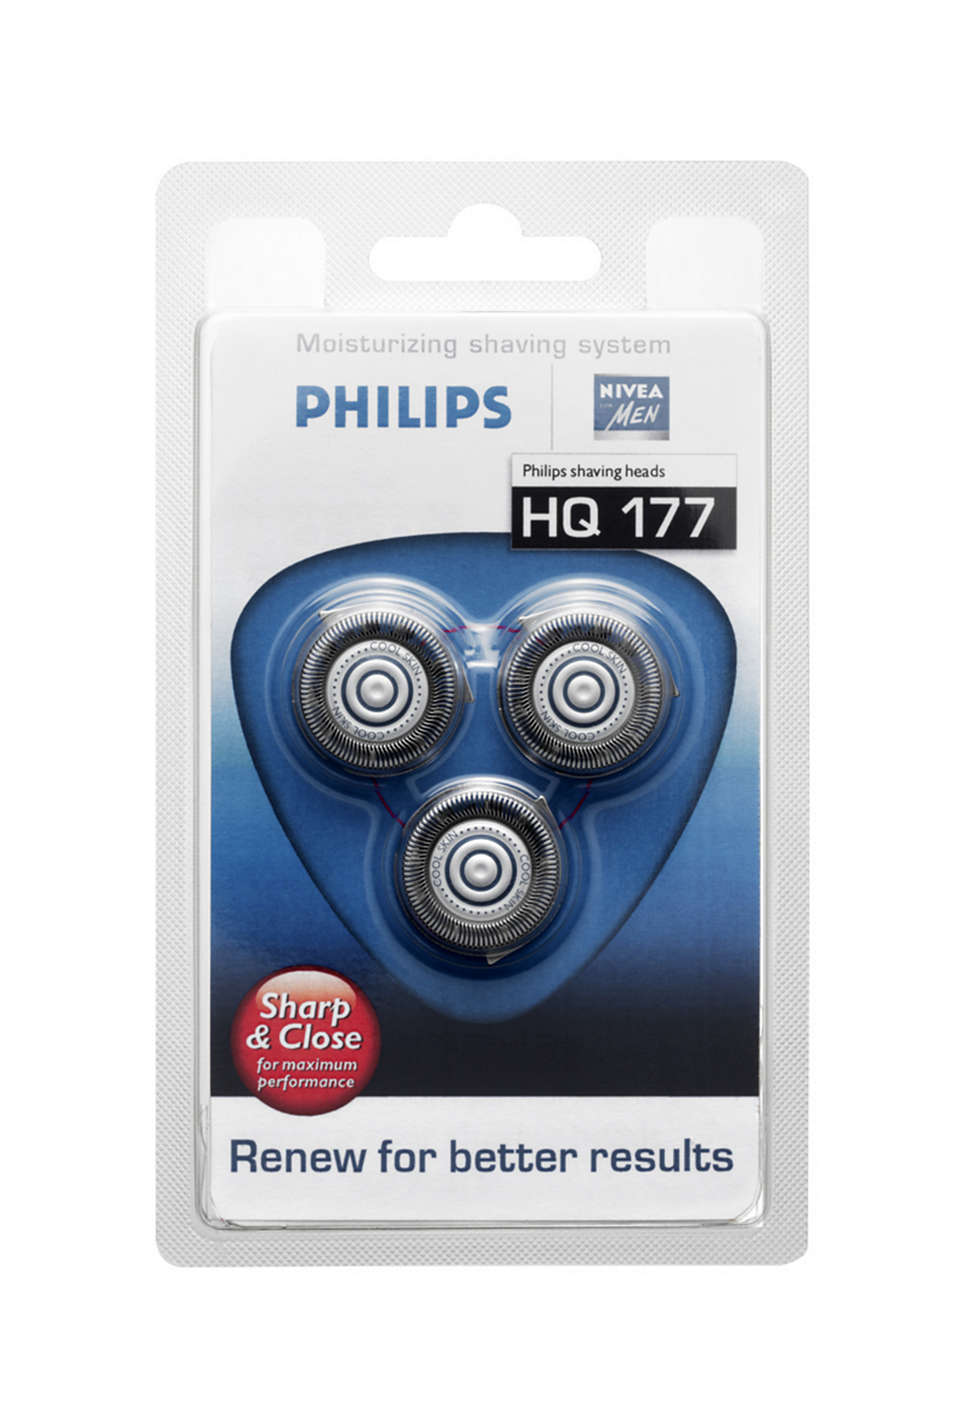 Renew for better results